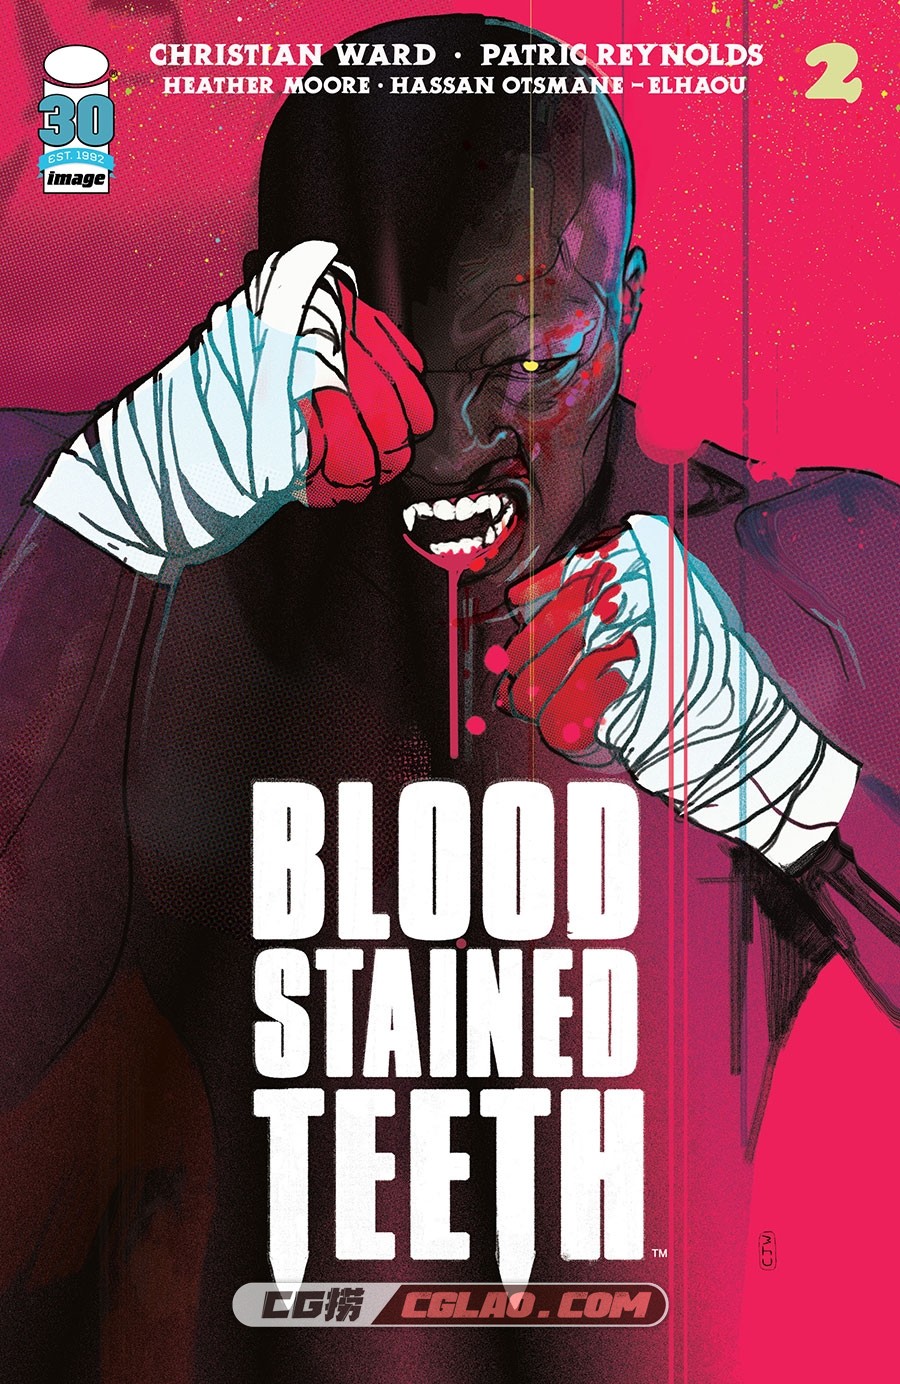 Blood Stained Teeth 002 (2022) Digital Zone Empire 漫画 百度网盘下载,Blood-Stained-Teeth-002-000.jpg